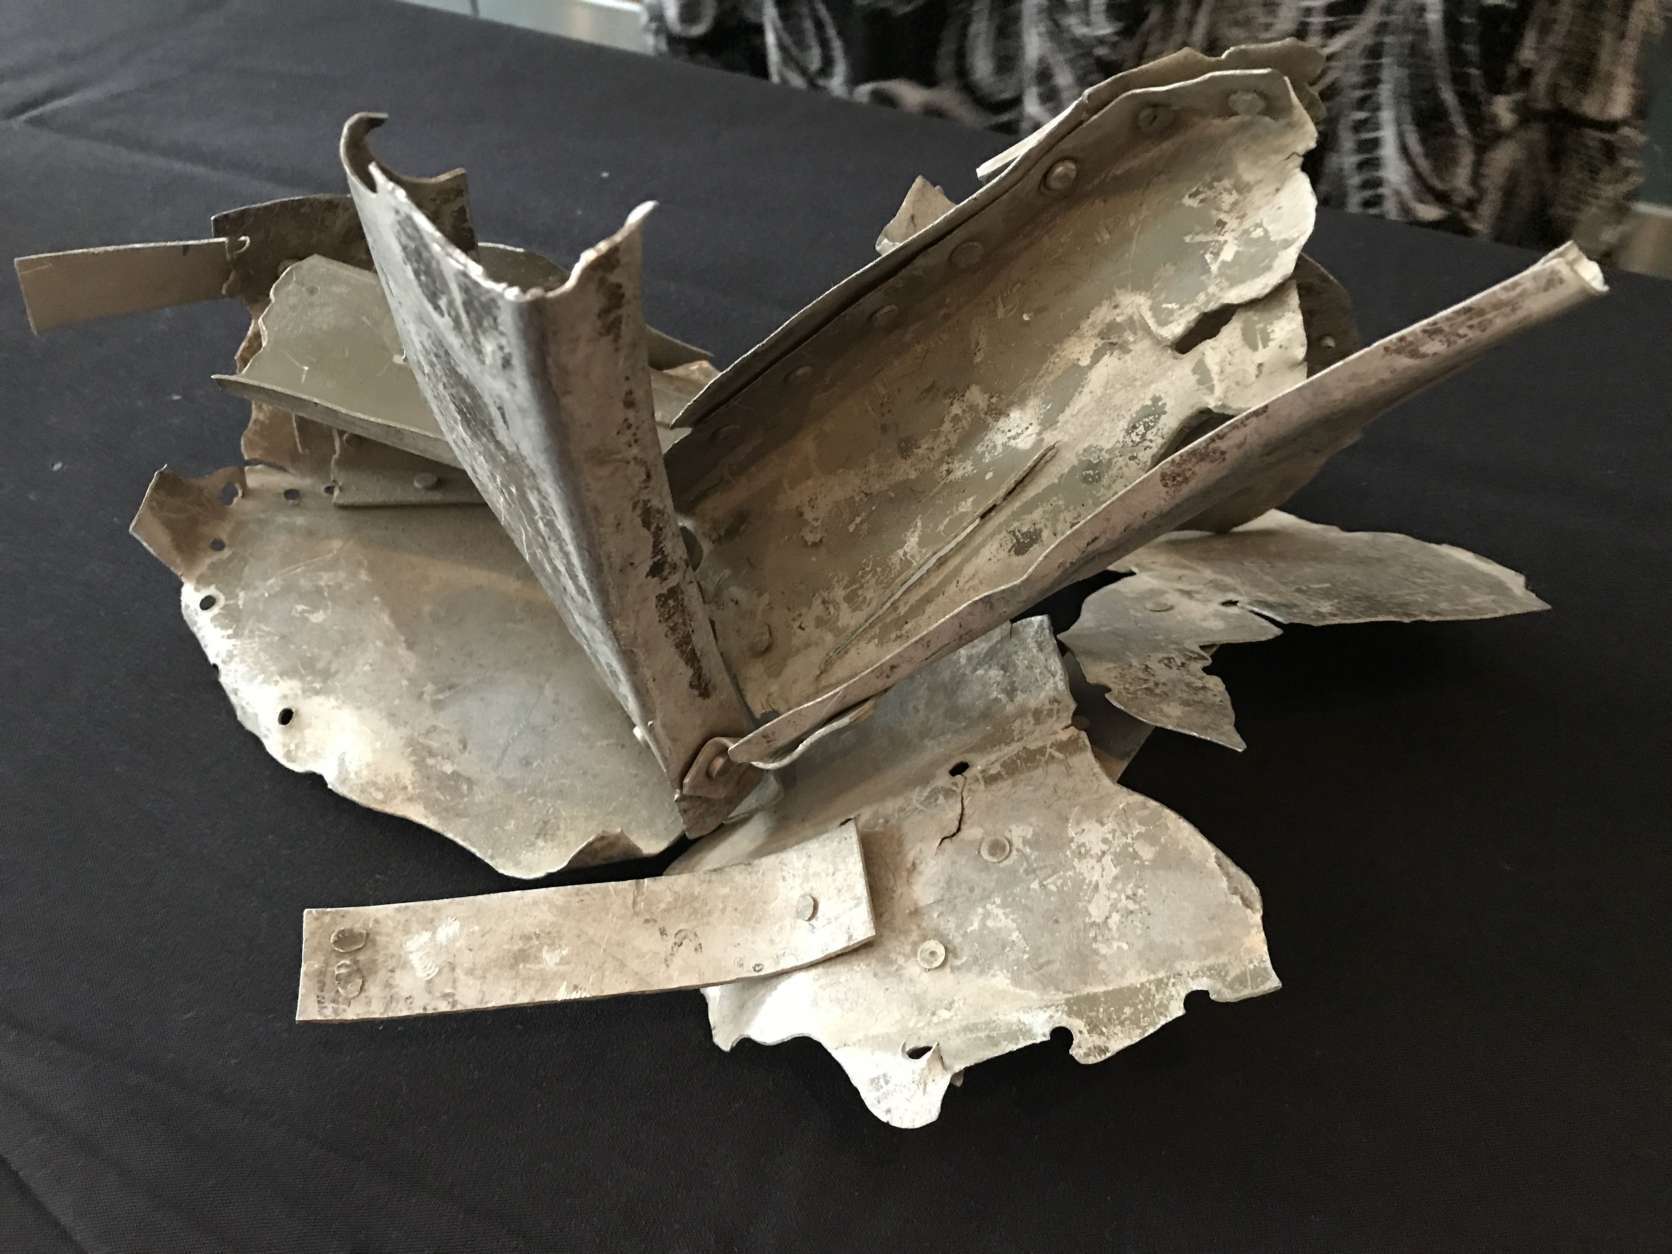 Also joining the museum's collection is a mangled piece of the U2 spy plane, flown by U.S. pilot Francis Gary Powers. It was shot down over the Soviet Union in 1960. (WTOP/Ginger Whitaker)